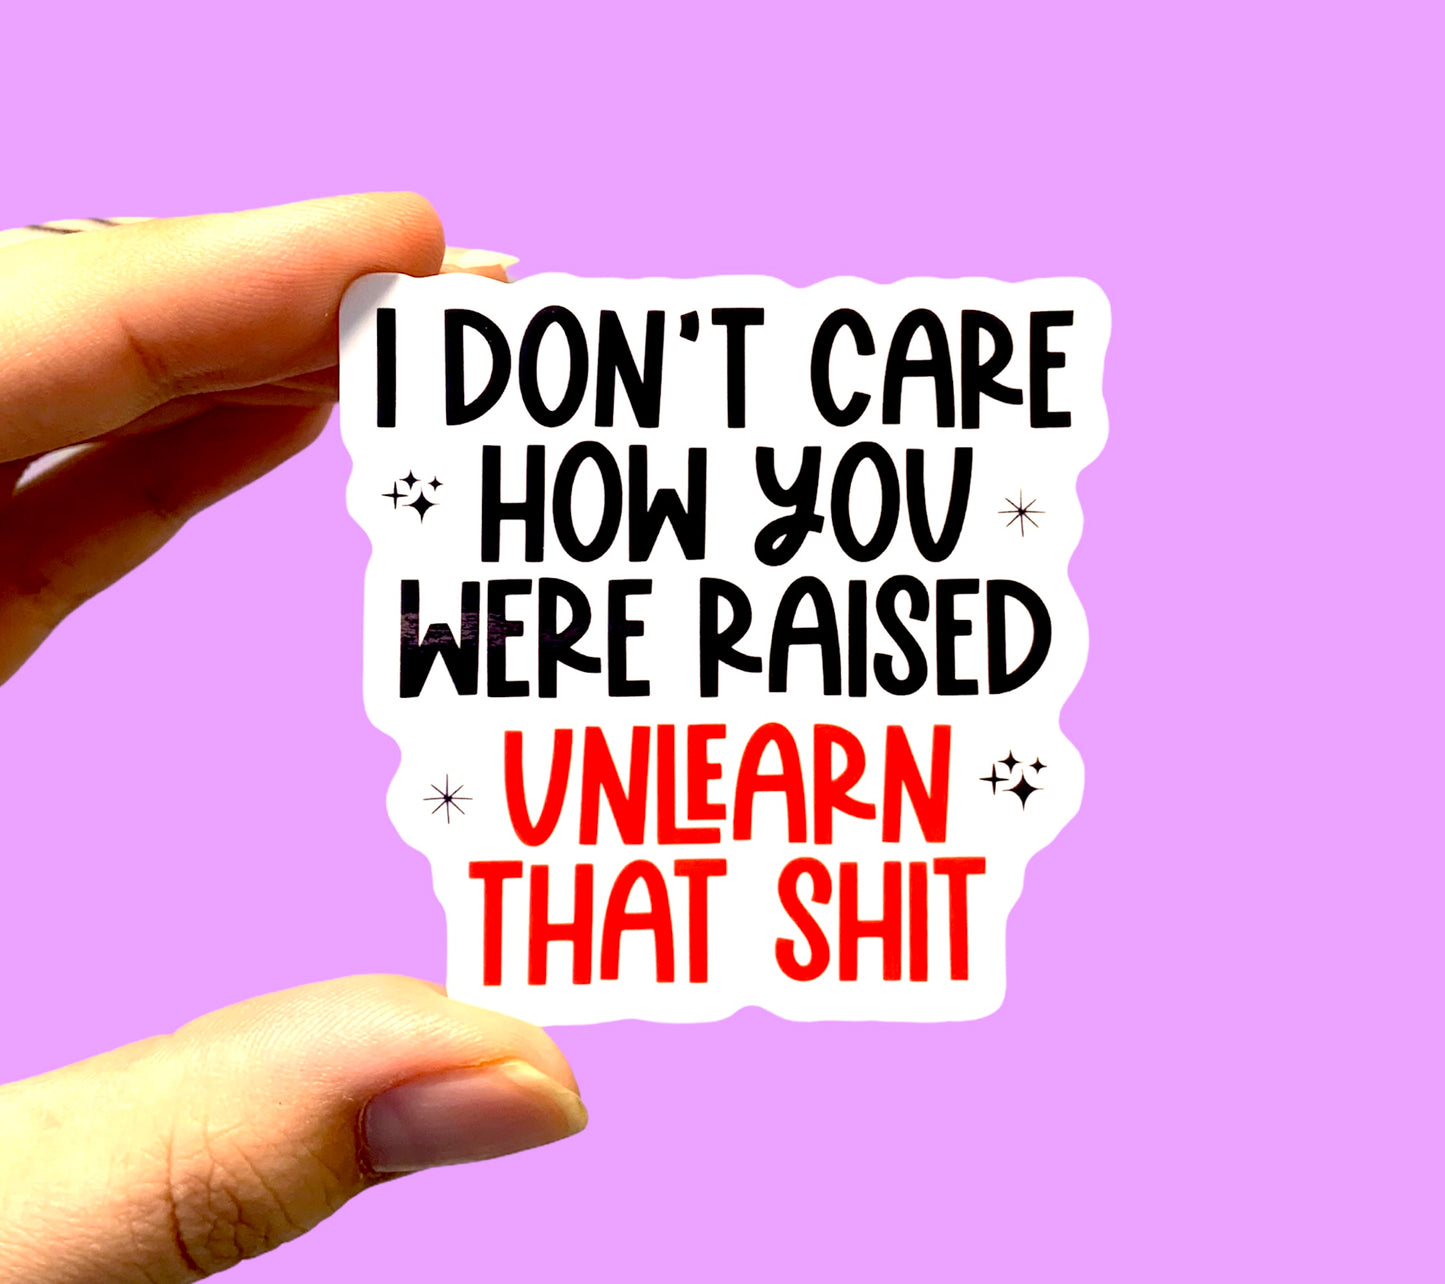 I don’t care how you were raised unlearn that shit (pack of 3 or 5 stickers)